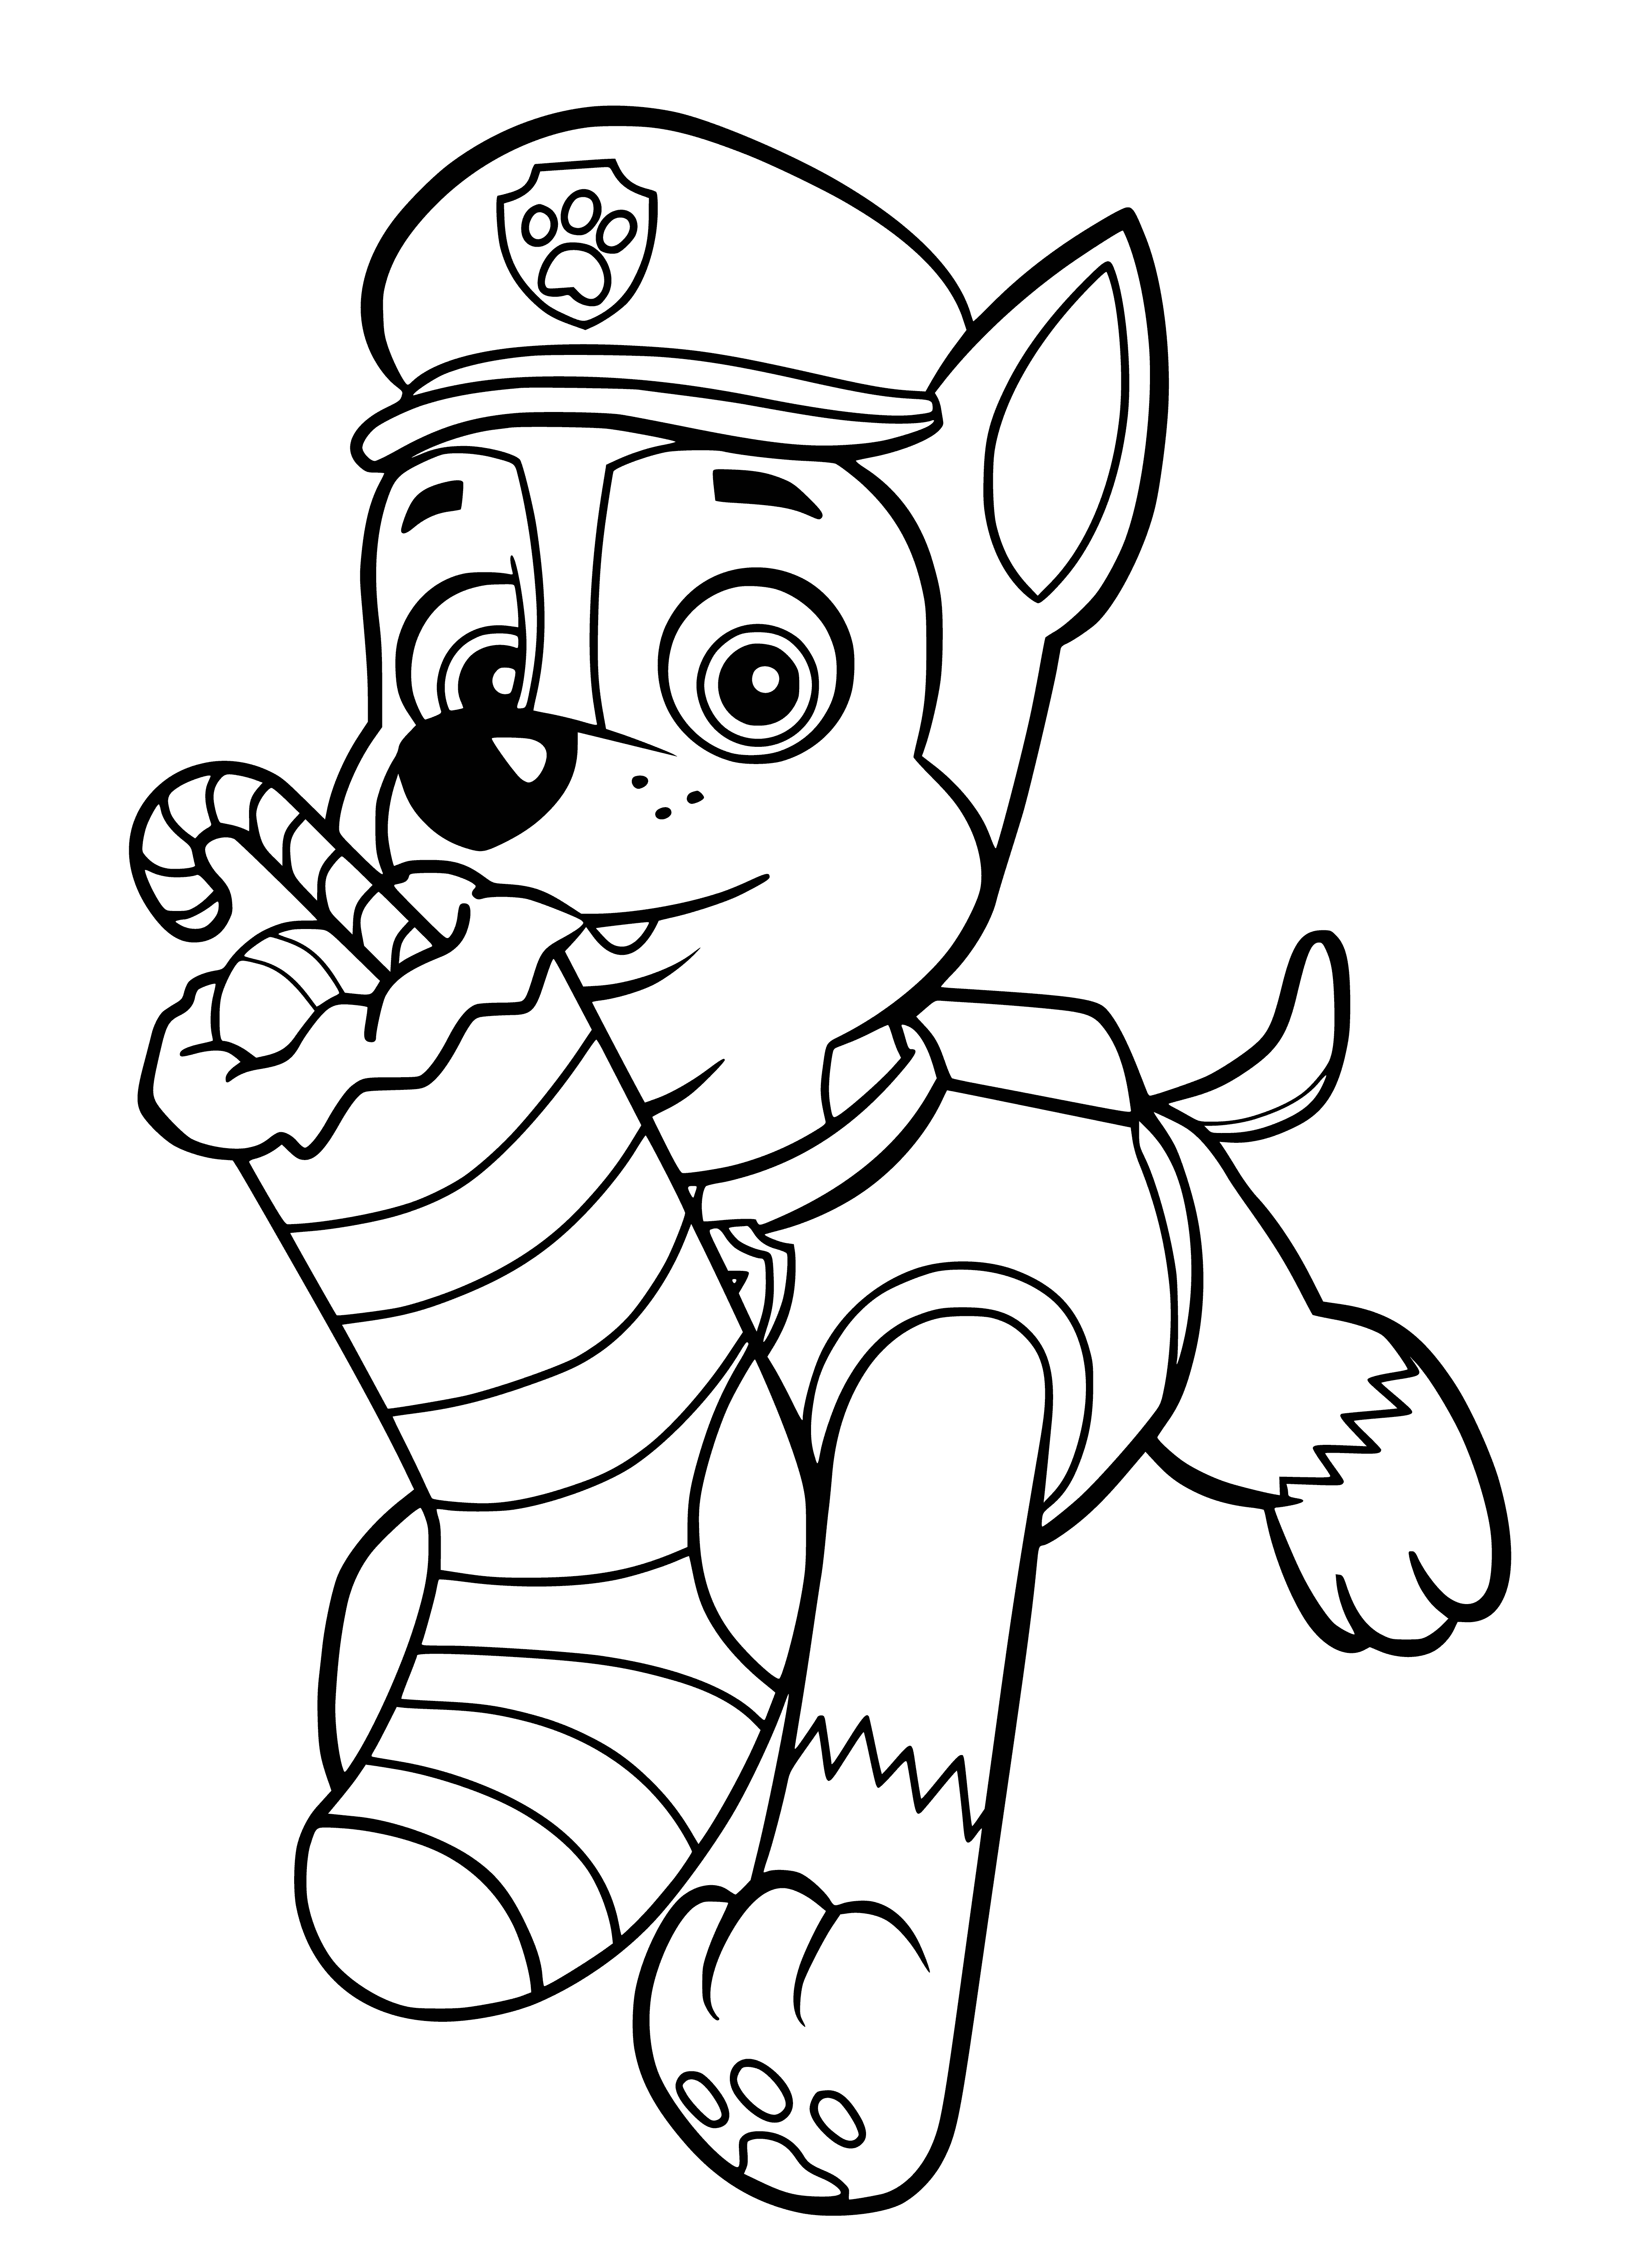 Racer - Paw Patrol coloring page